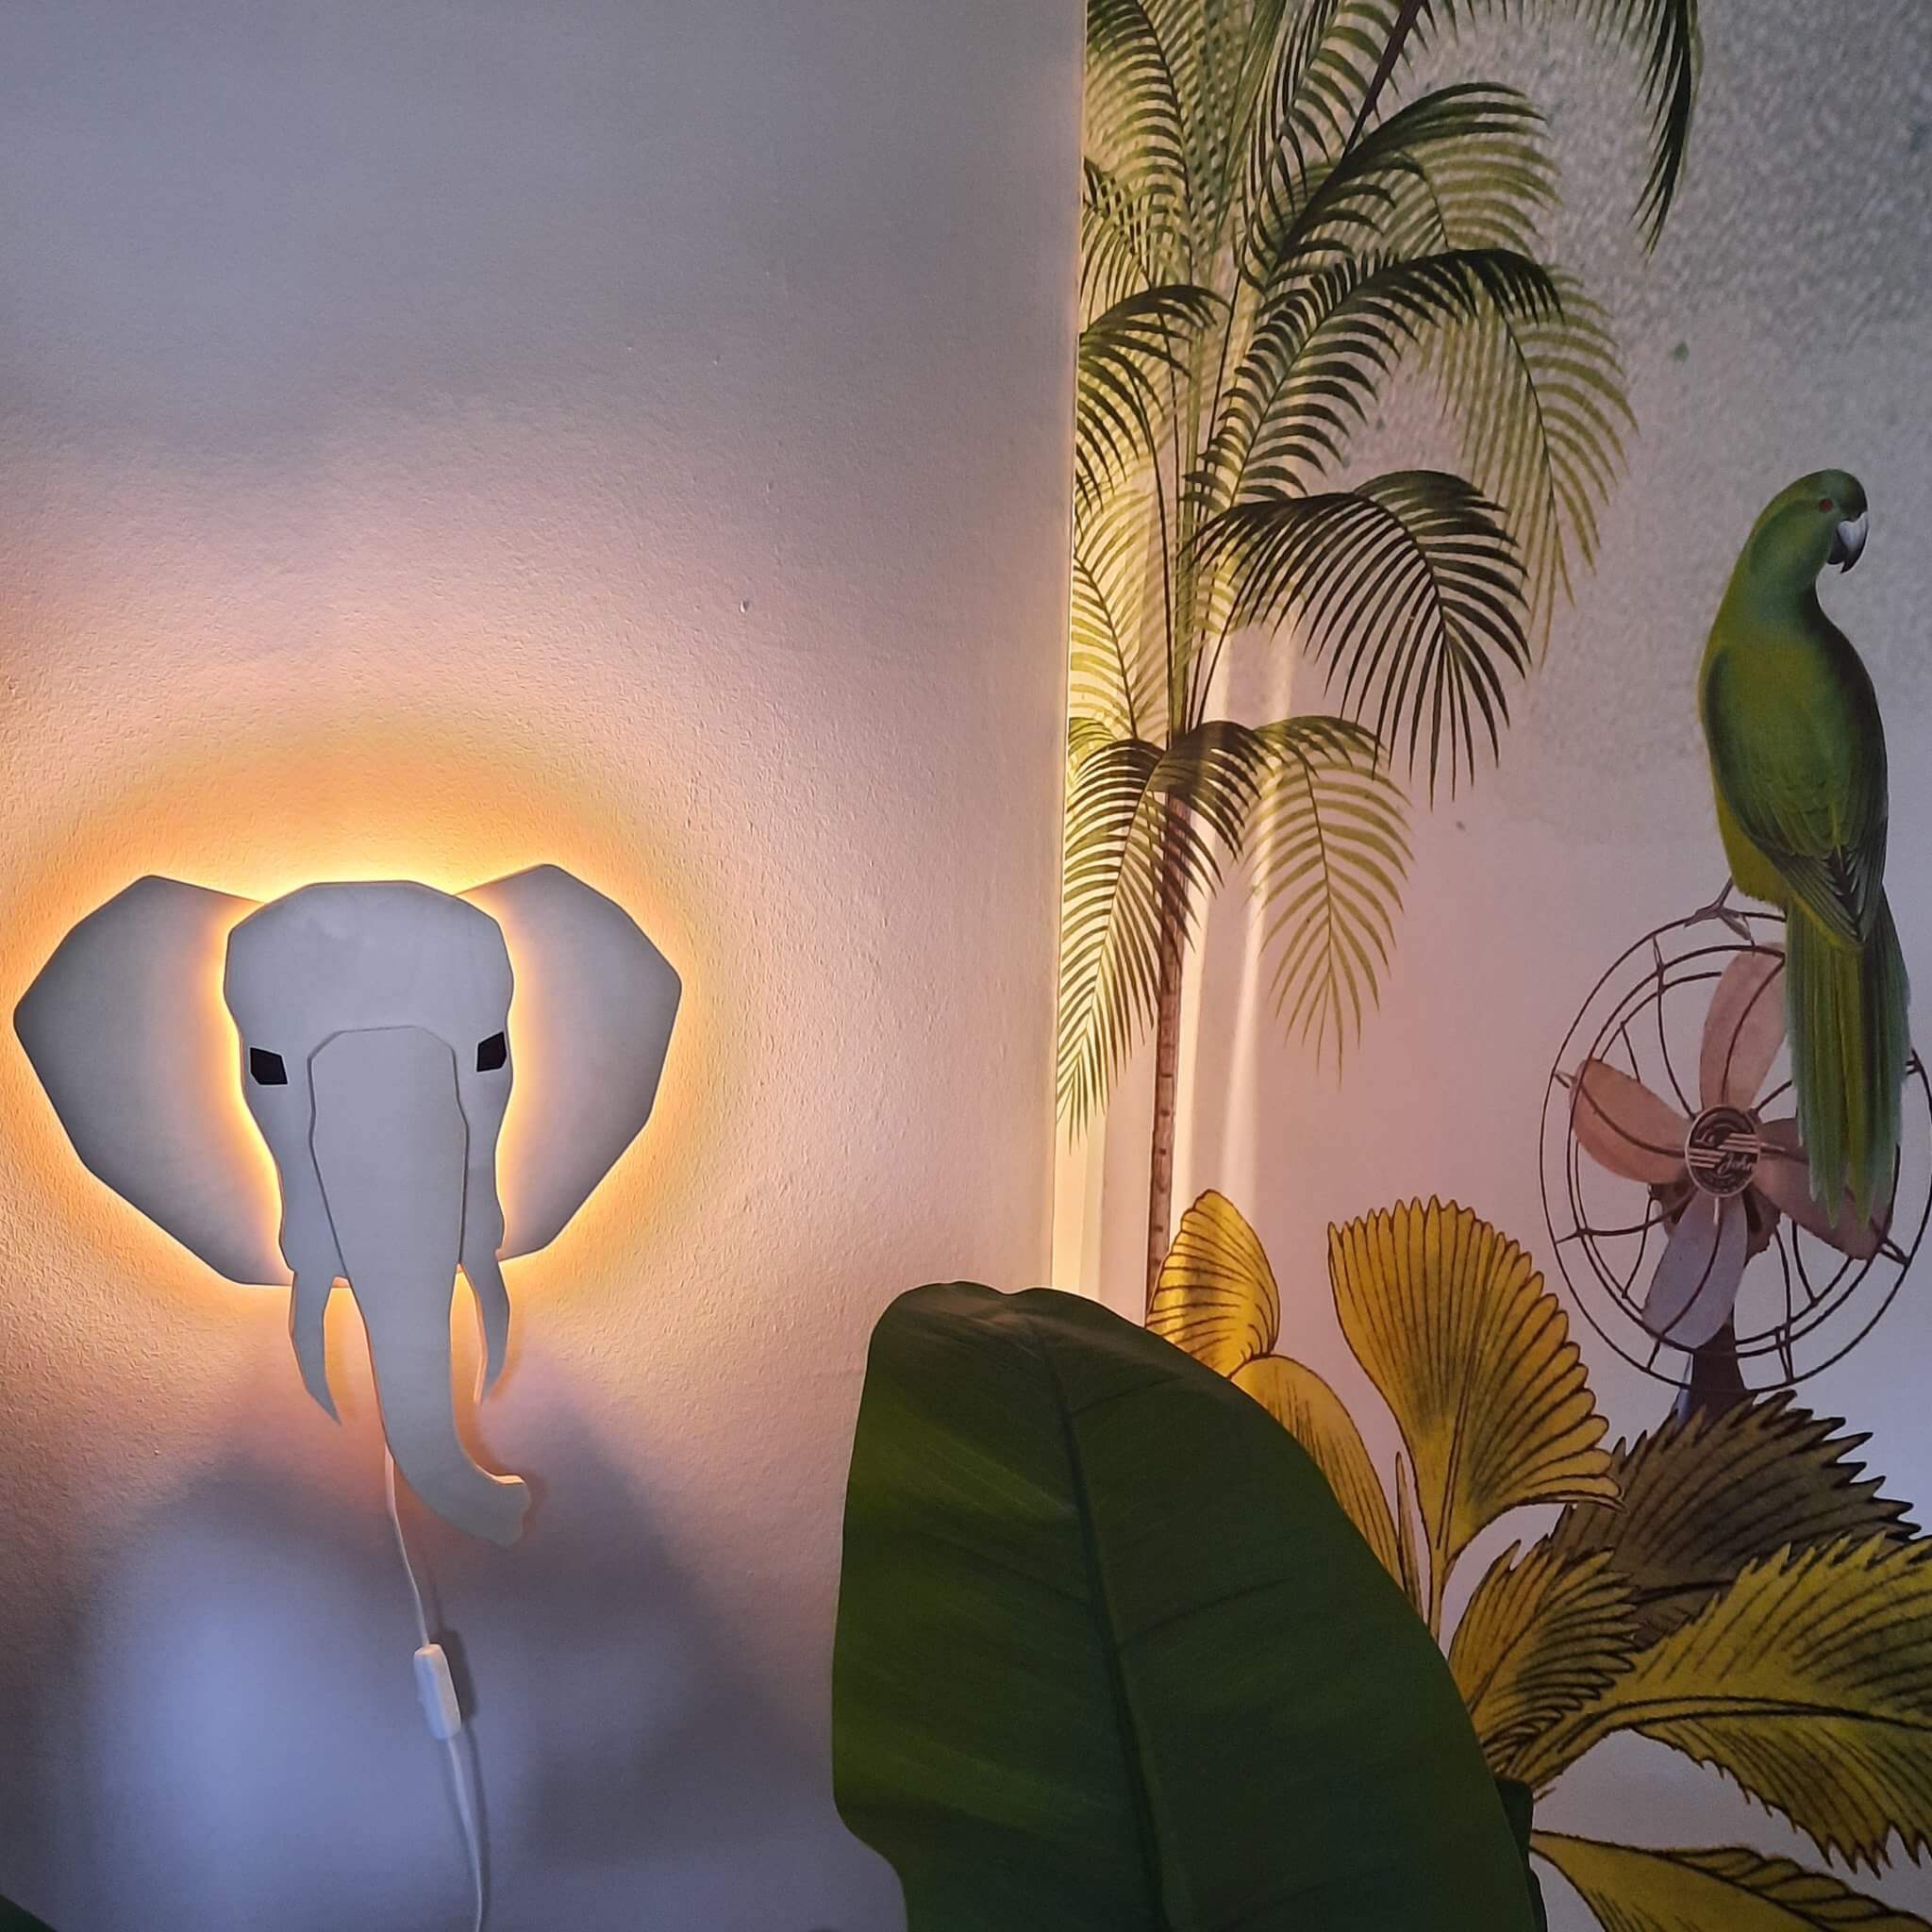 Wooden children’s room wall lamp | Elephant 3D, plywood - toddie.com